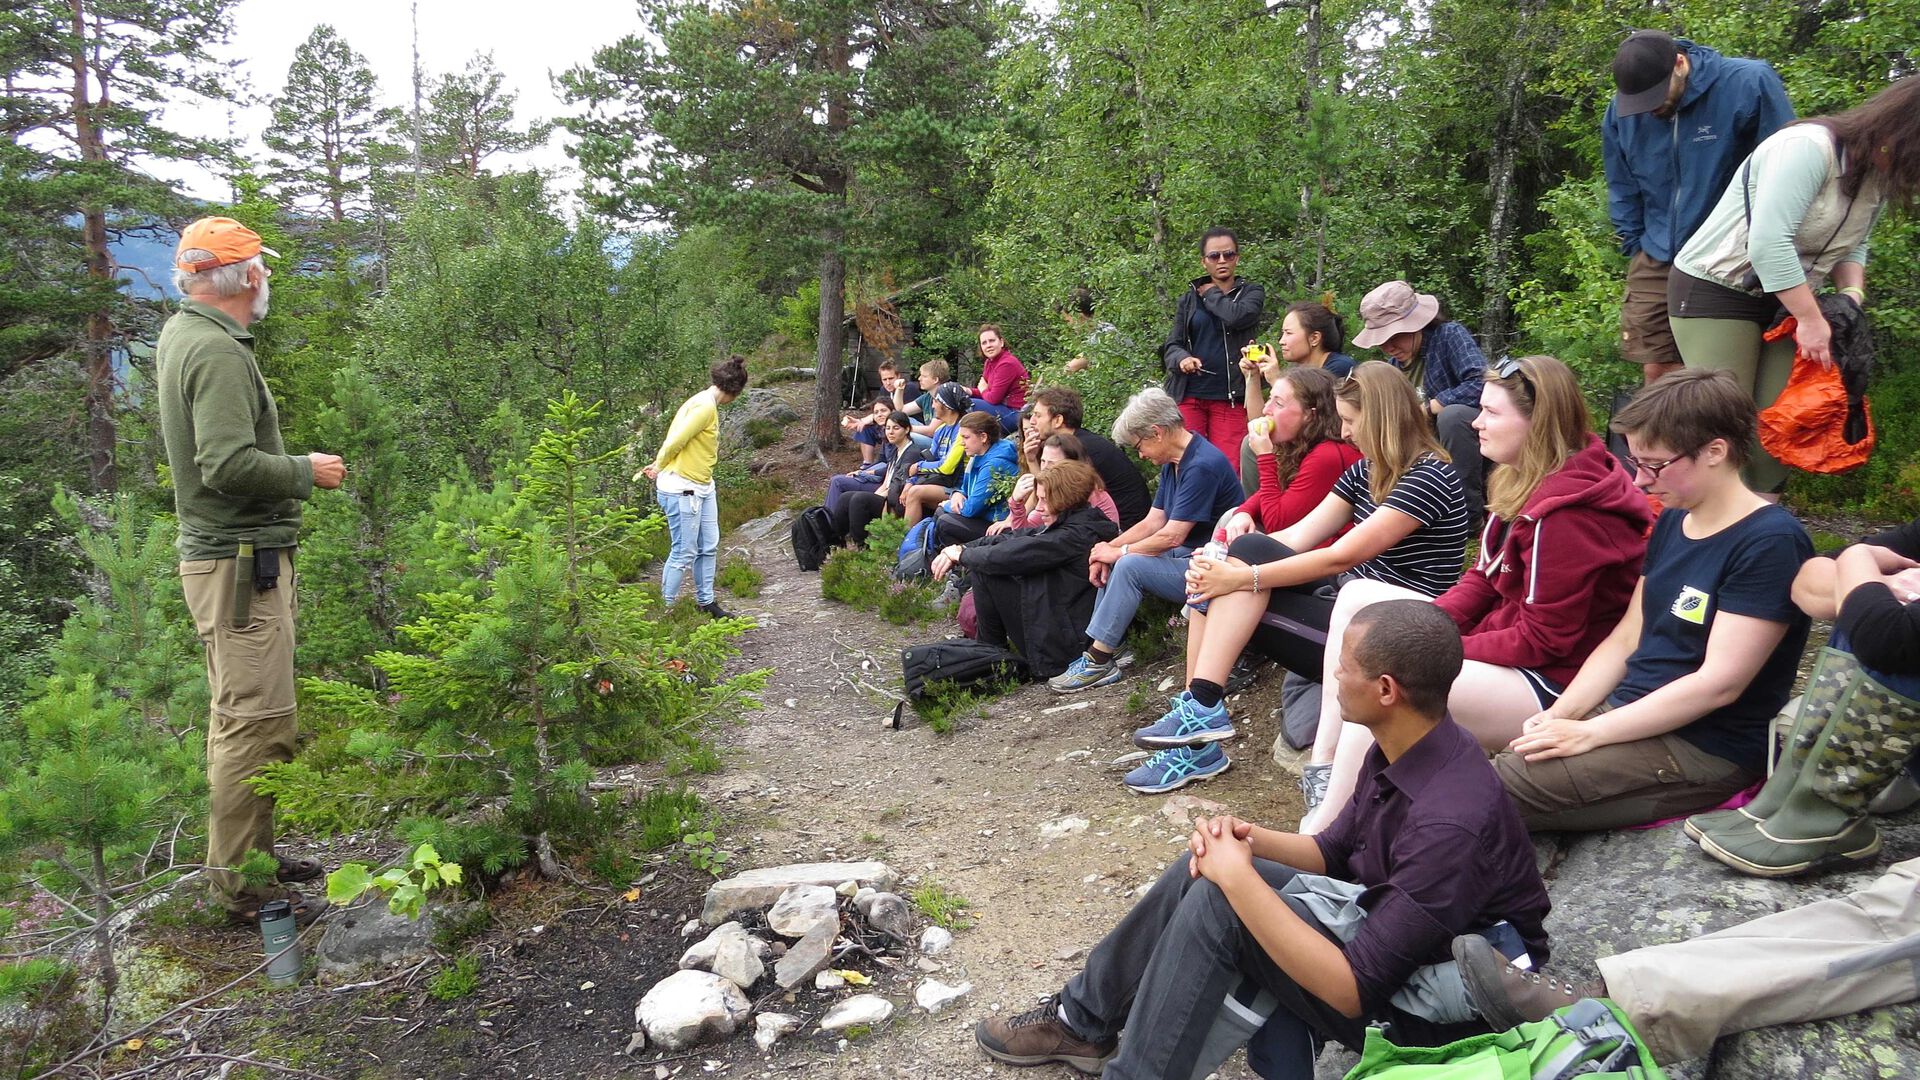 A group of students are sitting in the forest. In the background there is green trees. The teacher is standing infront of the students talking.